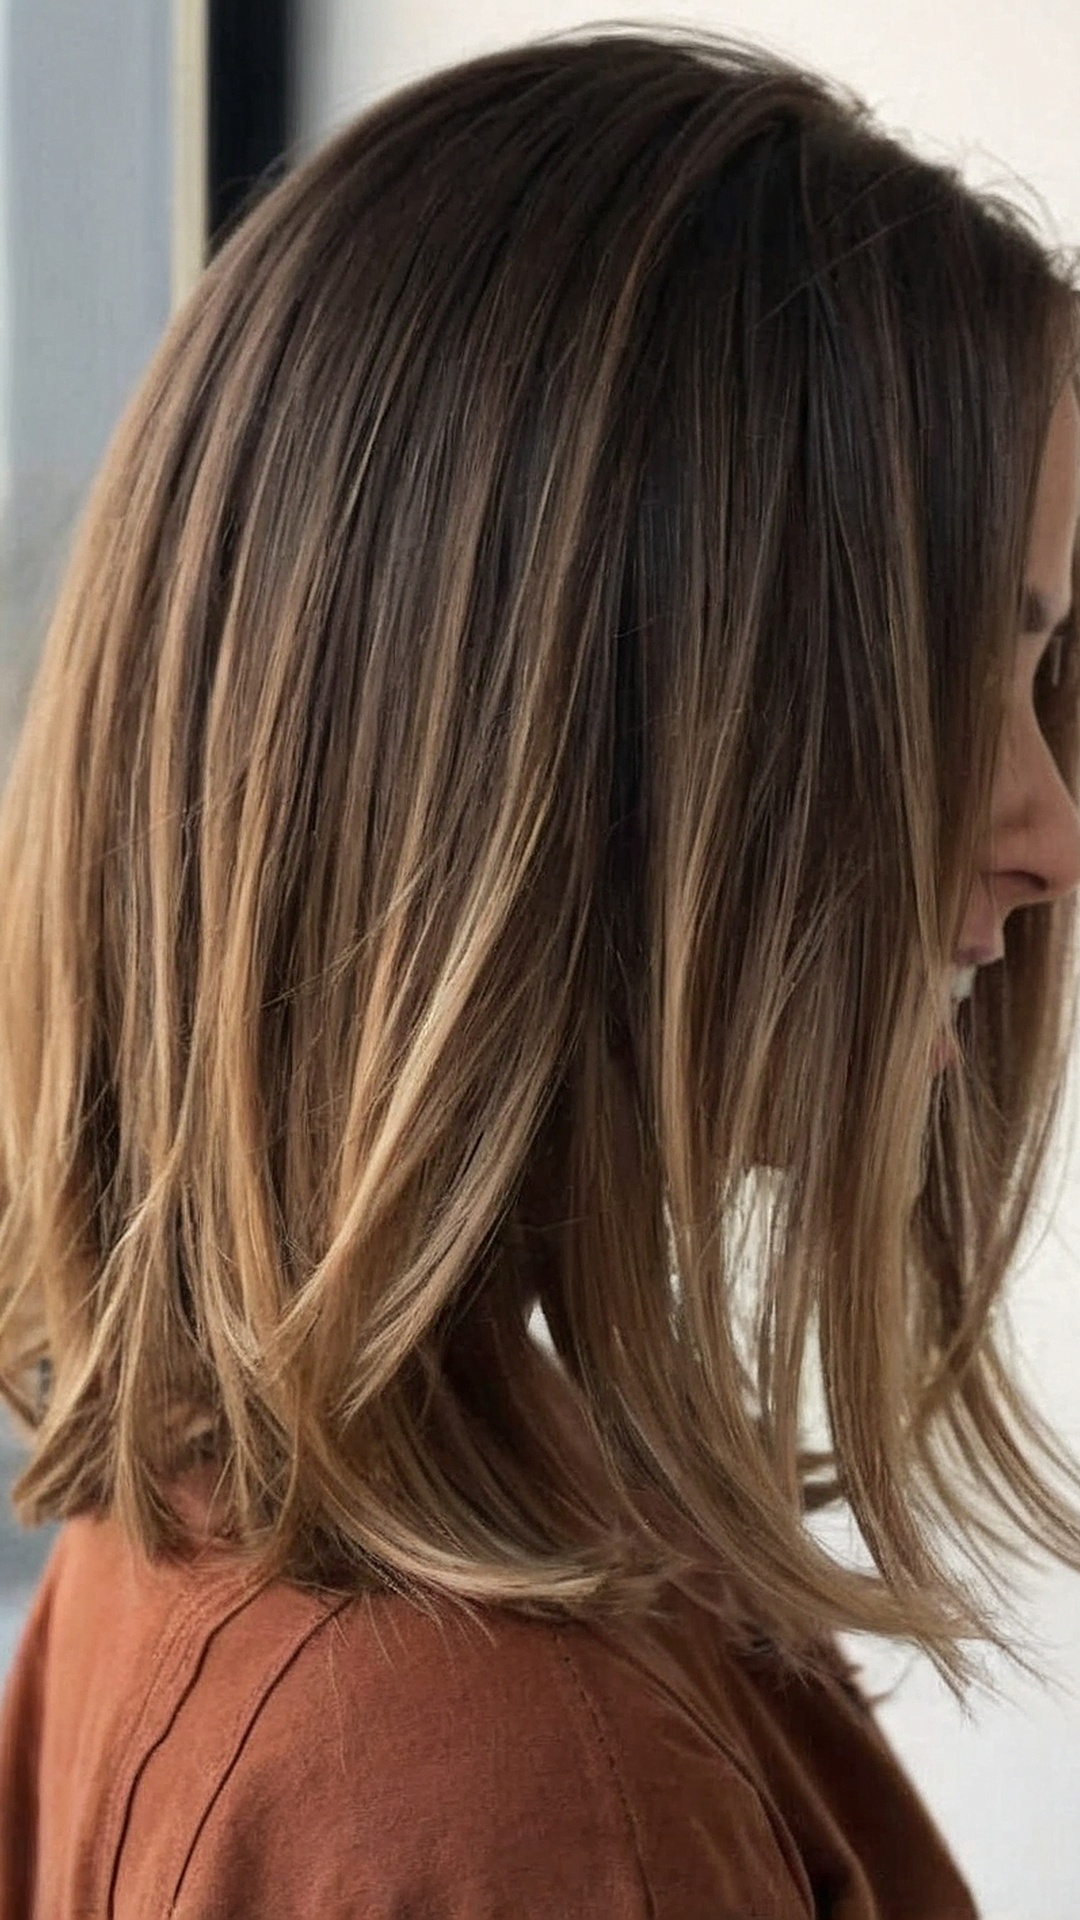 Sleek and Sophisticated: Thin Hair Styling Ideas